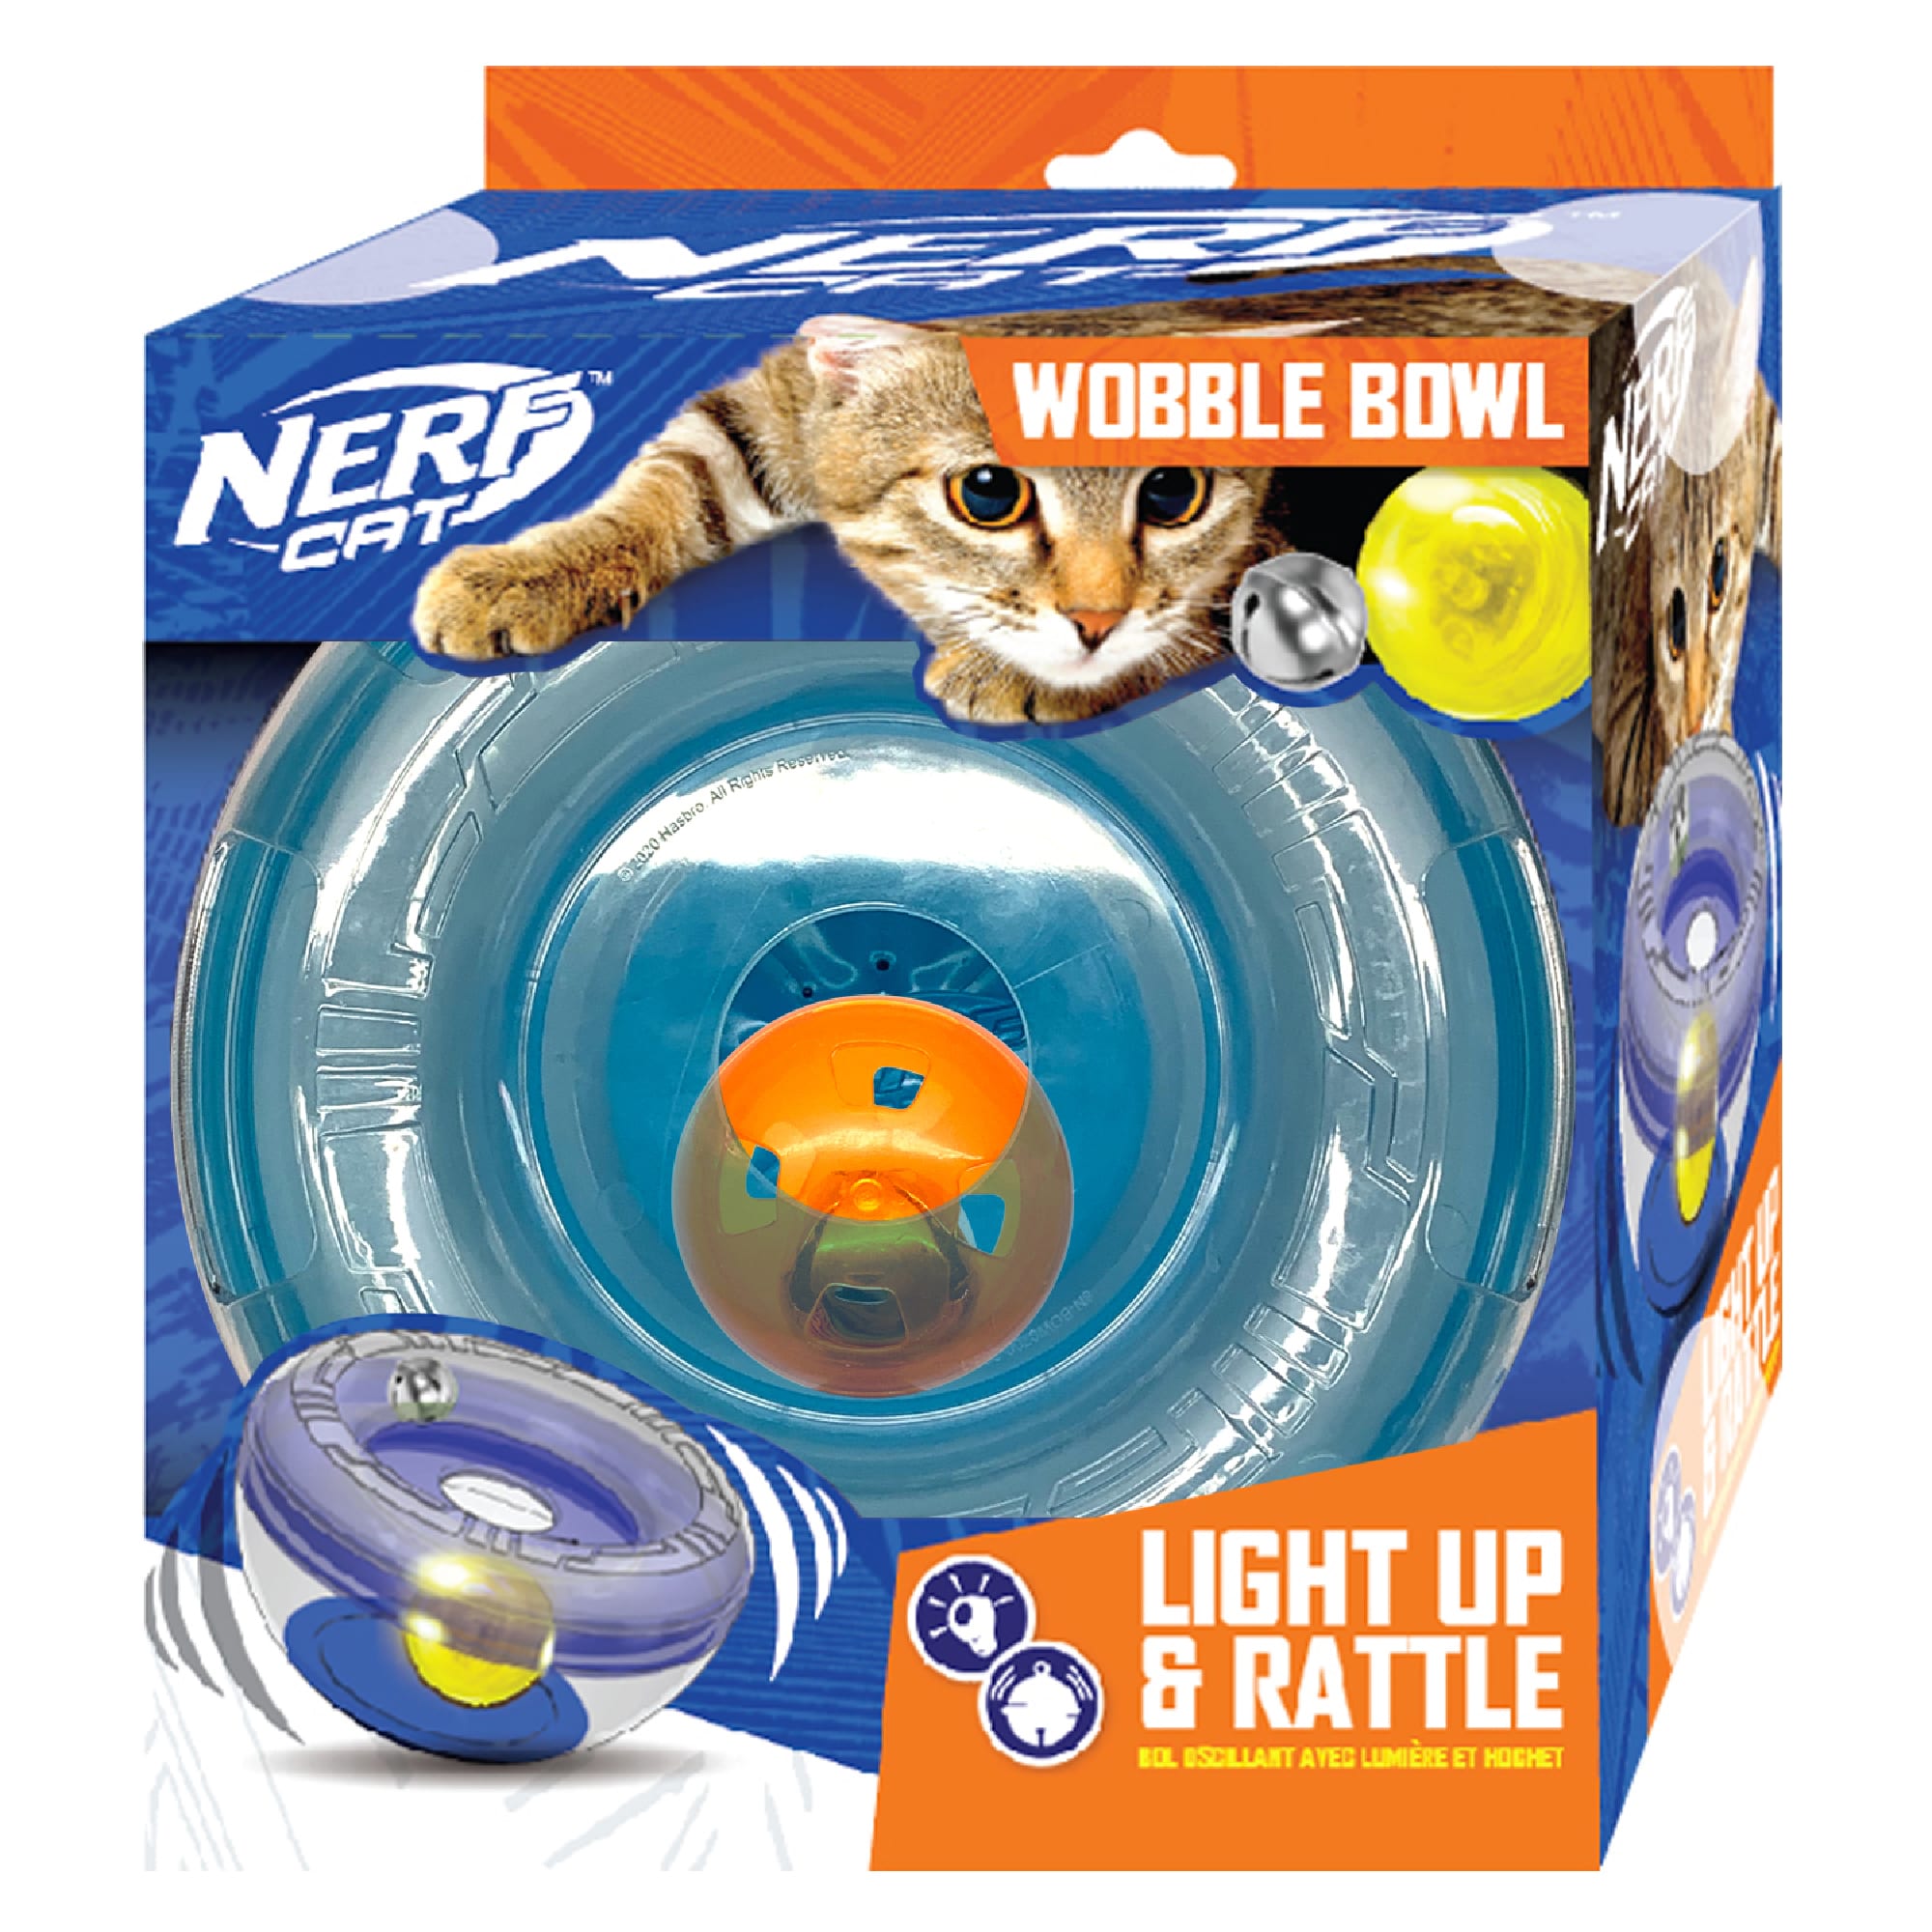 Nerf Wobble Bowl with LED Ball and Bell Ball Cat Toy, Medium Petco